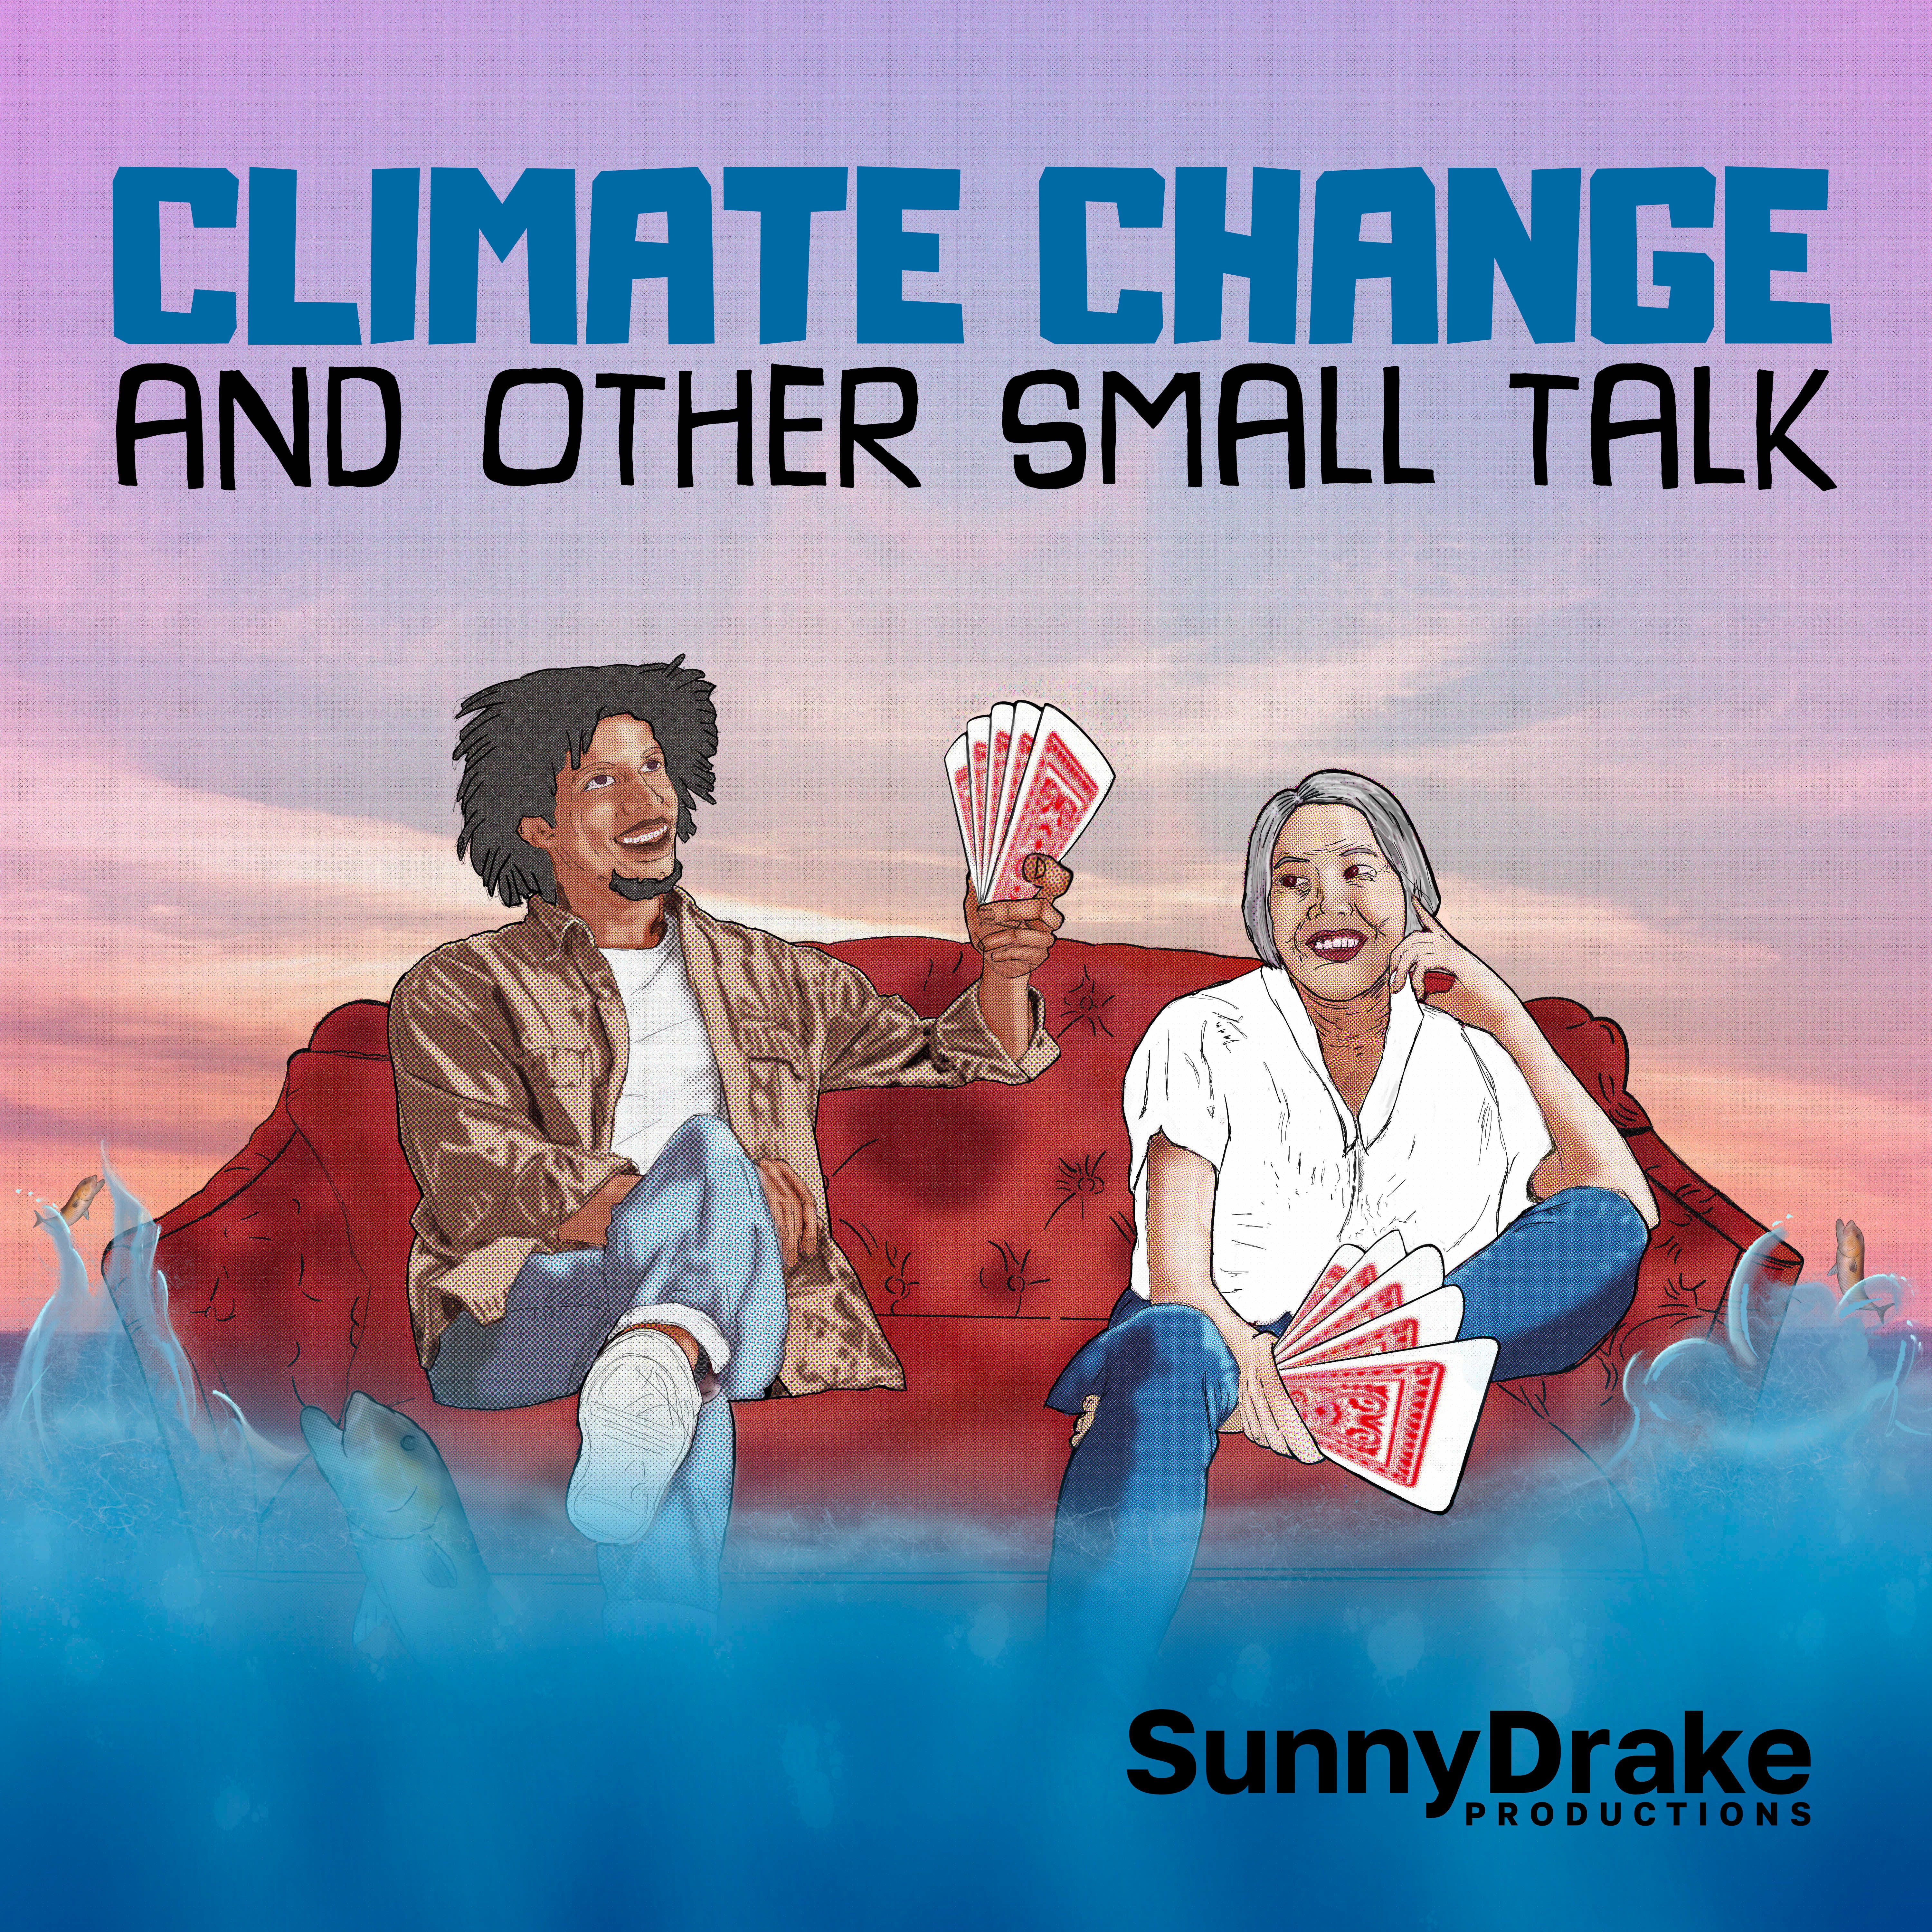 Two people on a couch floating in the ocean, playing cards. Text: Climate Change and Other Small Talk. Logo: Sunny Drake Productions.